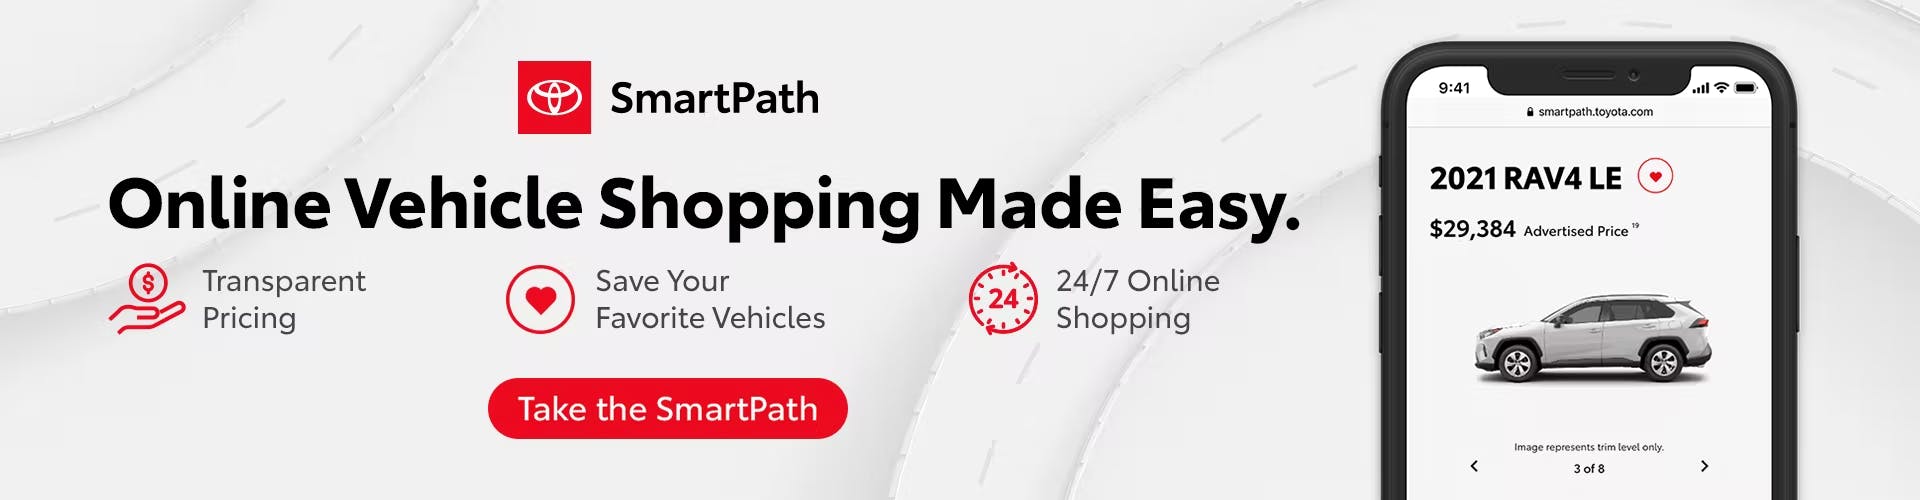 Smartpath Banners